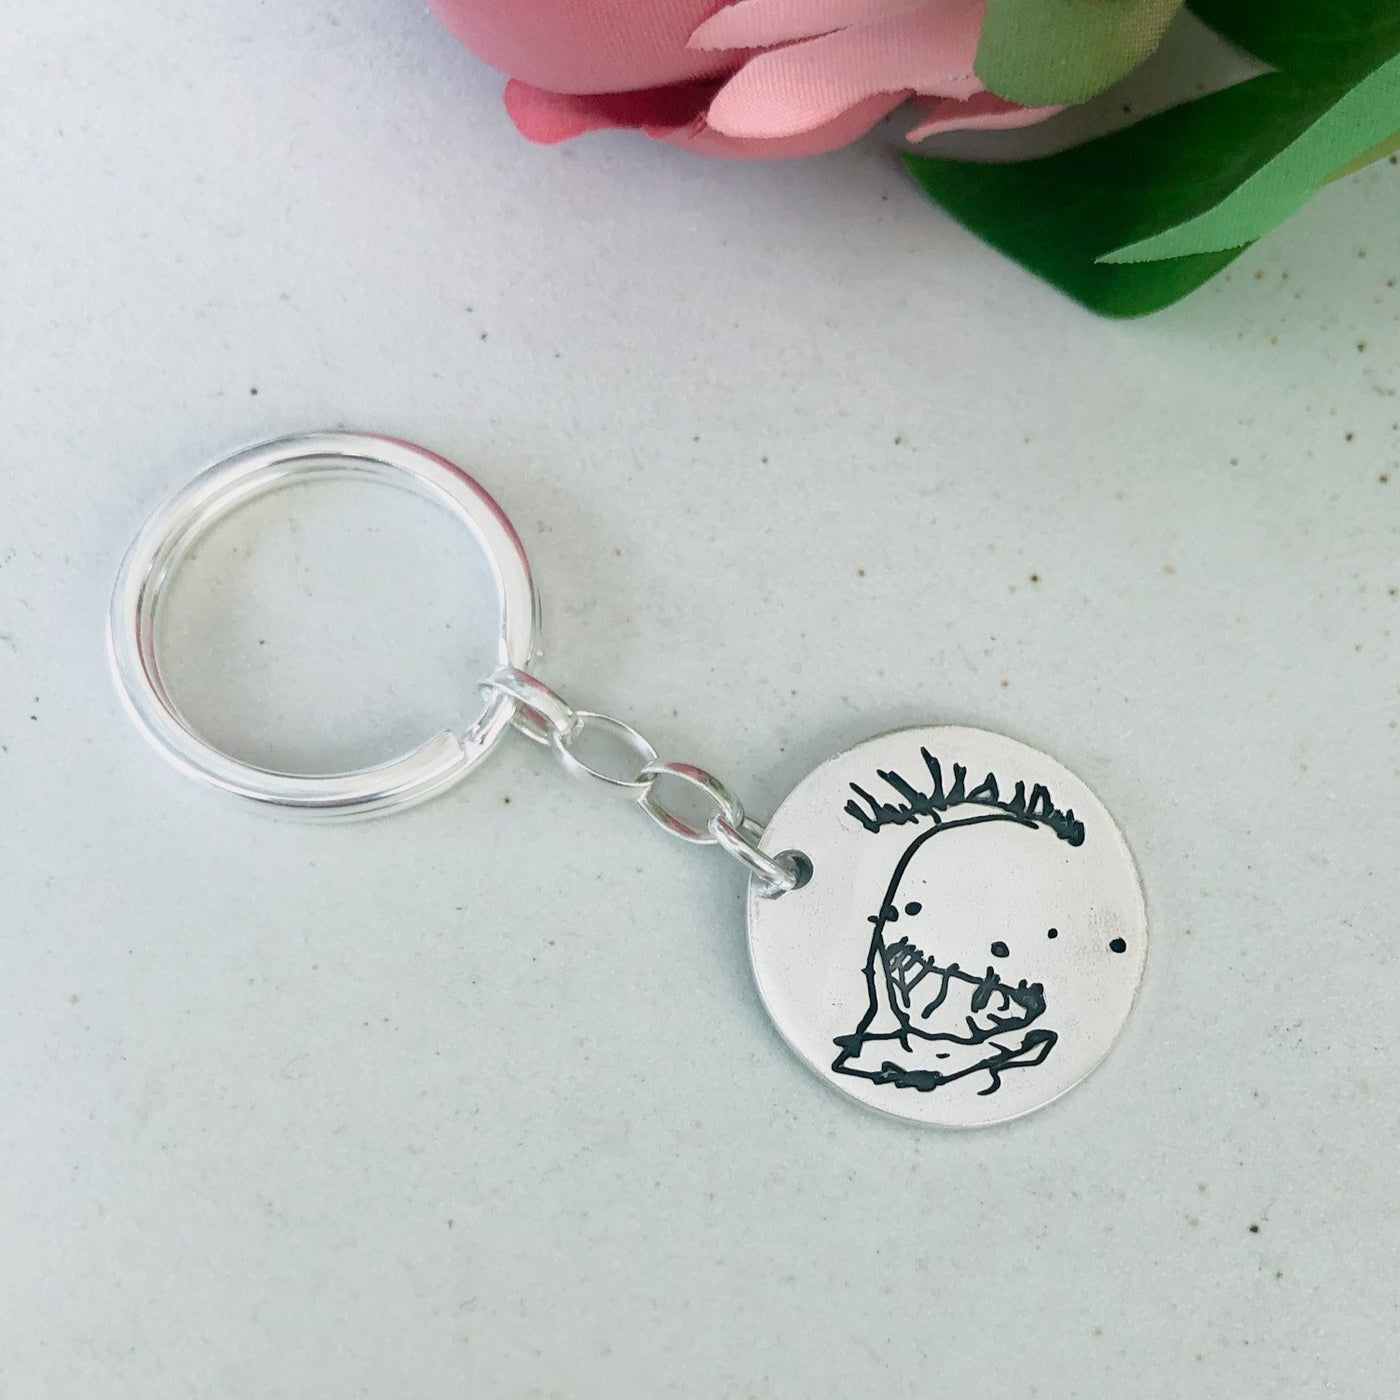 PERSONALIZED CHILDREN'S ARTWORK KEYCHAIN | forever imprint jewellery